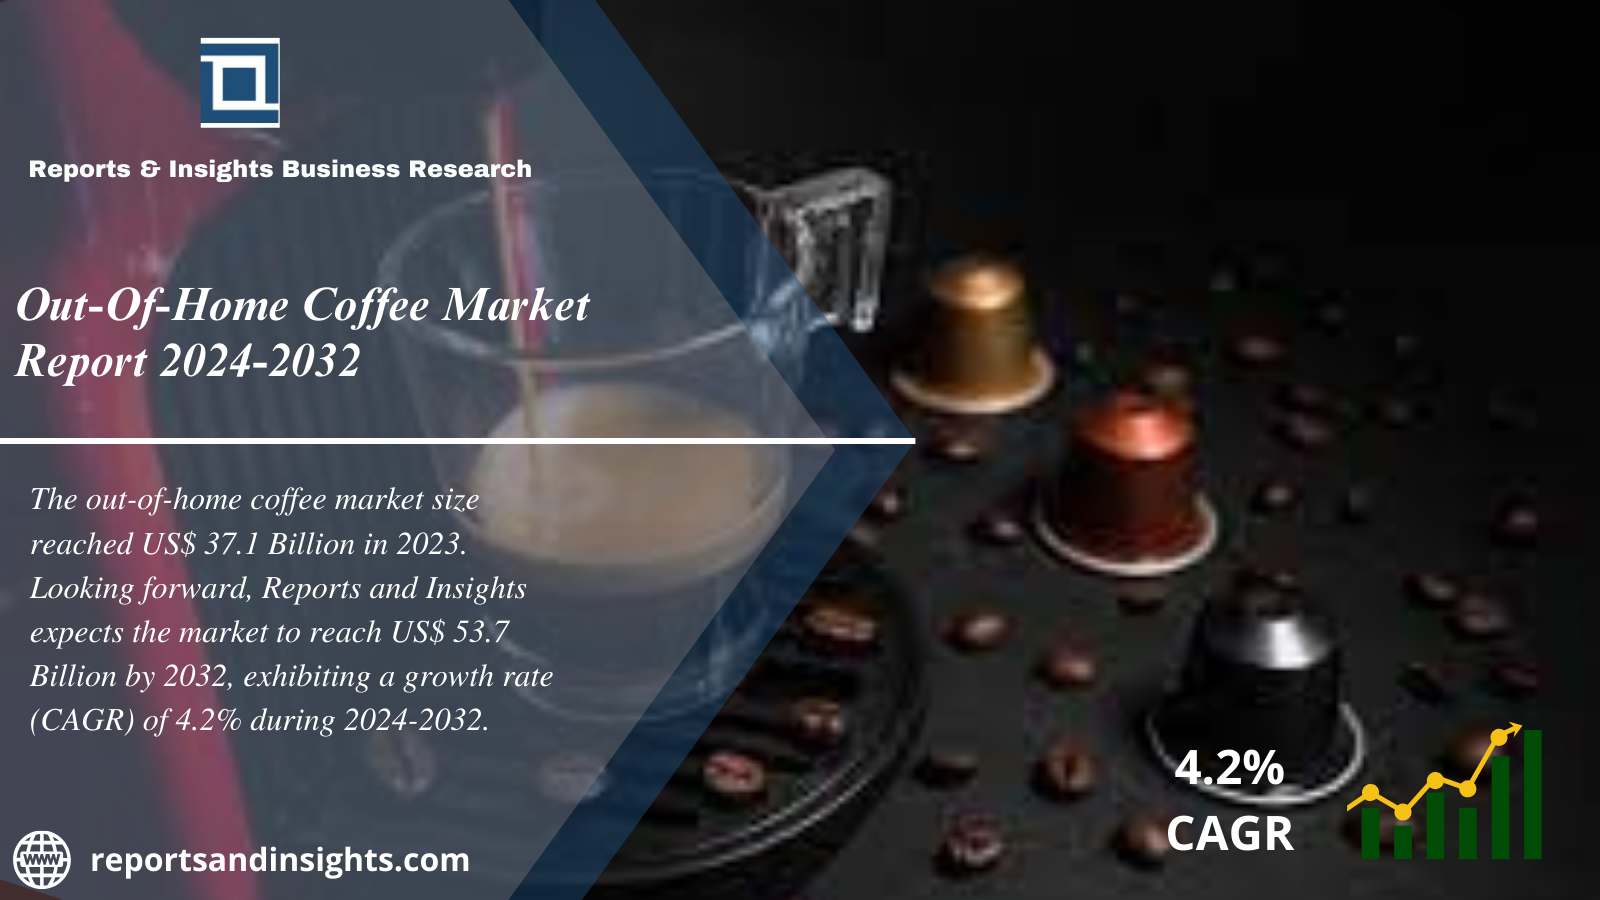 Out-Of-Home Coffee Market Trends, Growth, Size, Share, Key Players and Research Report 2024 to 2032